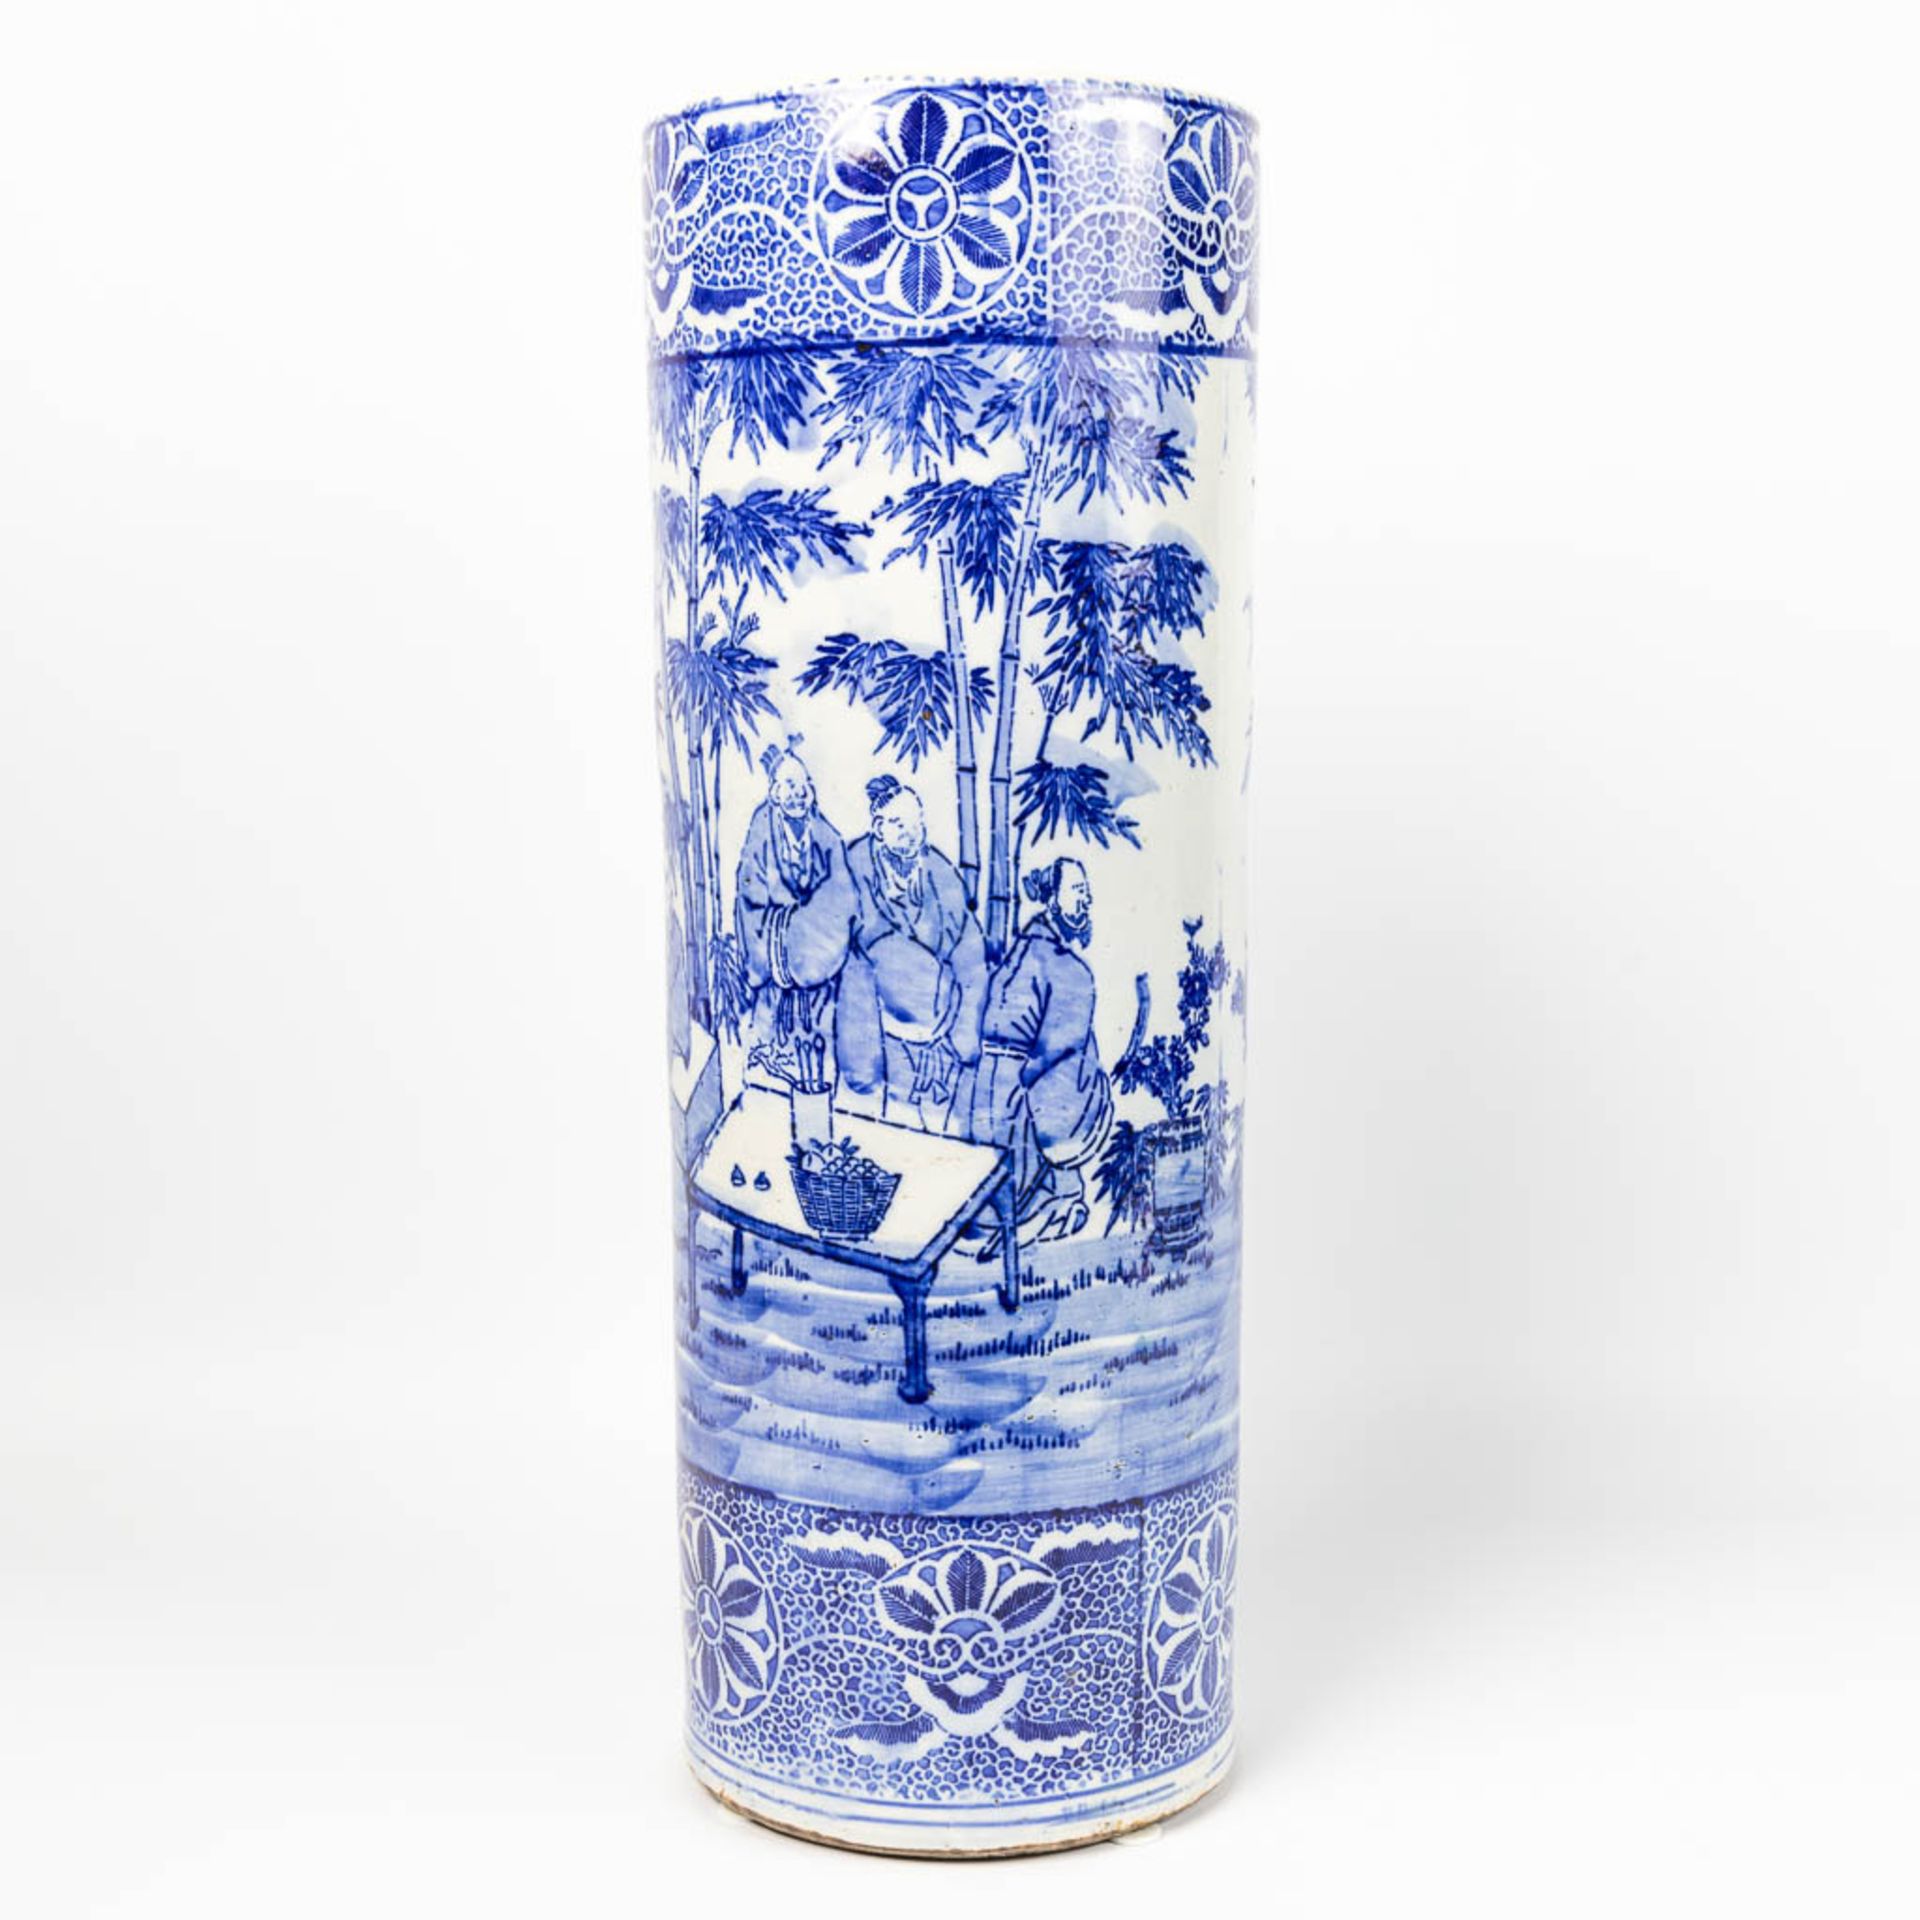 A vase made of Chinese Porcelain and decorated with a blue-white garden view. - Image 6 of 12